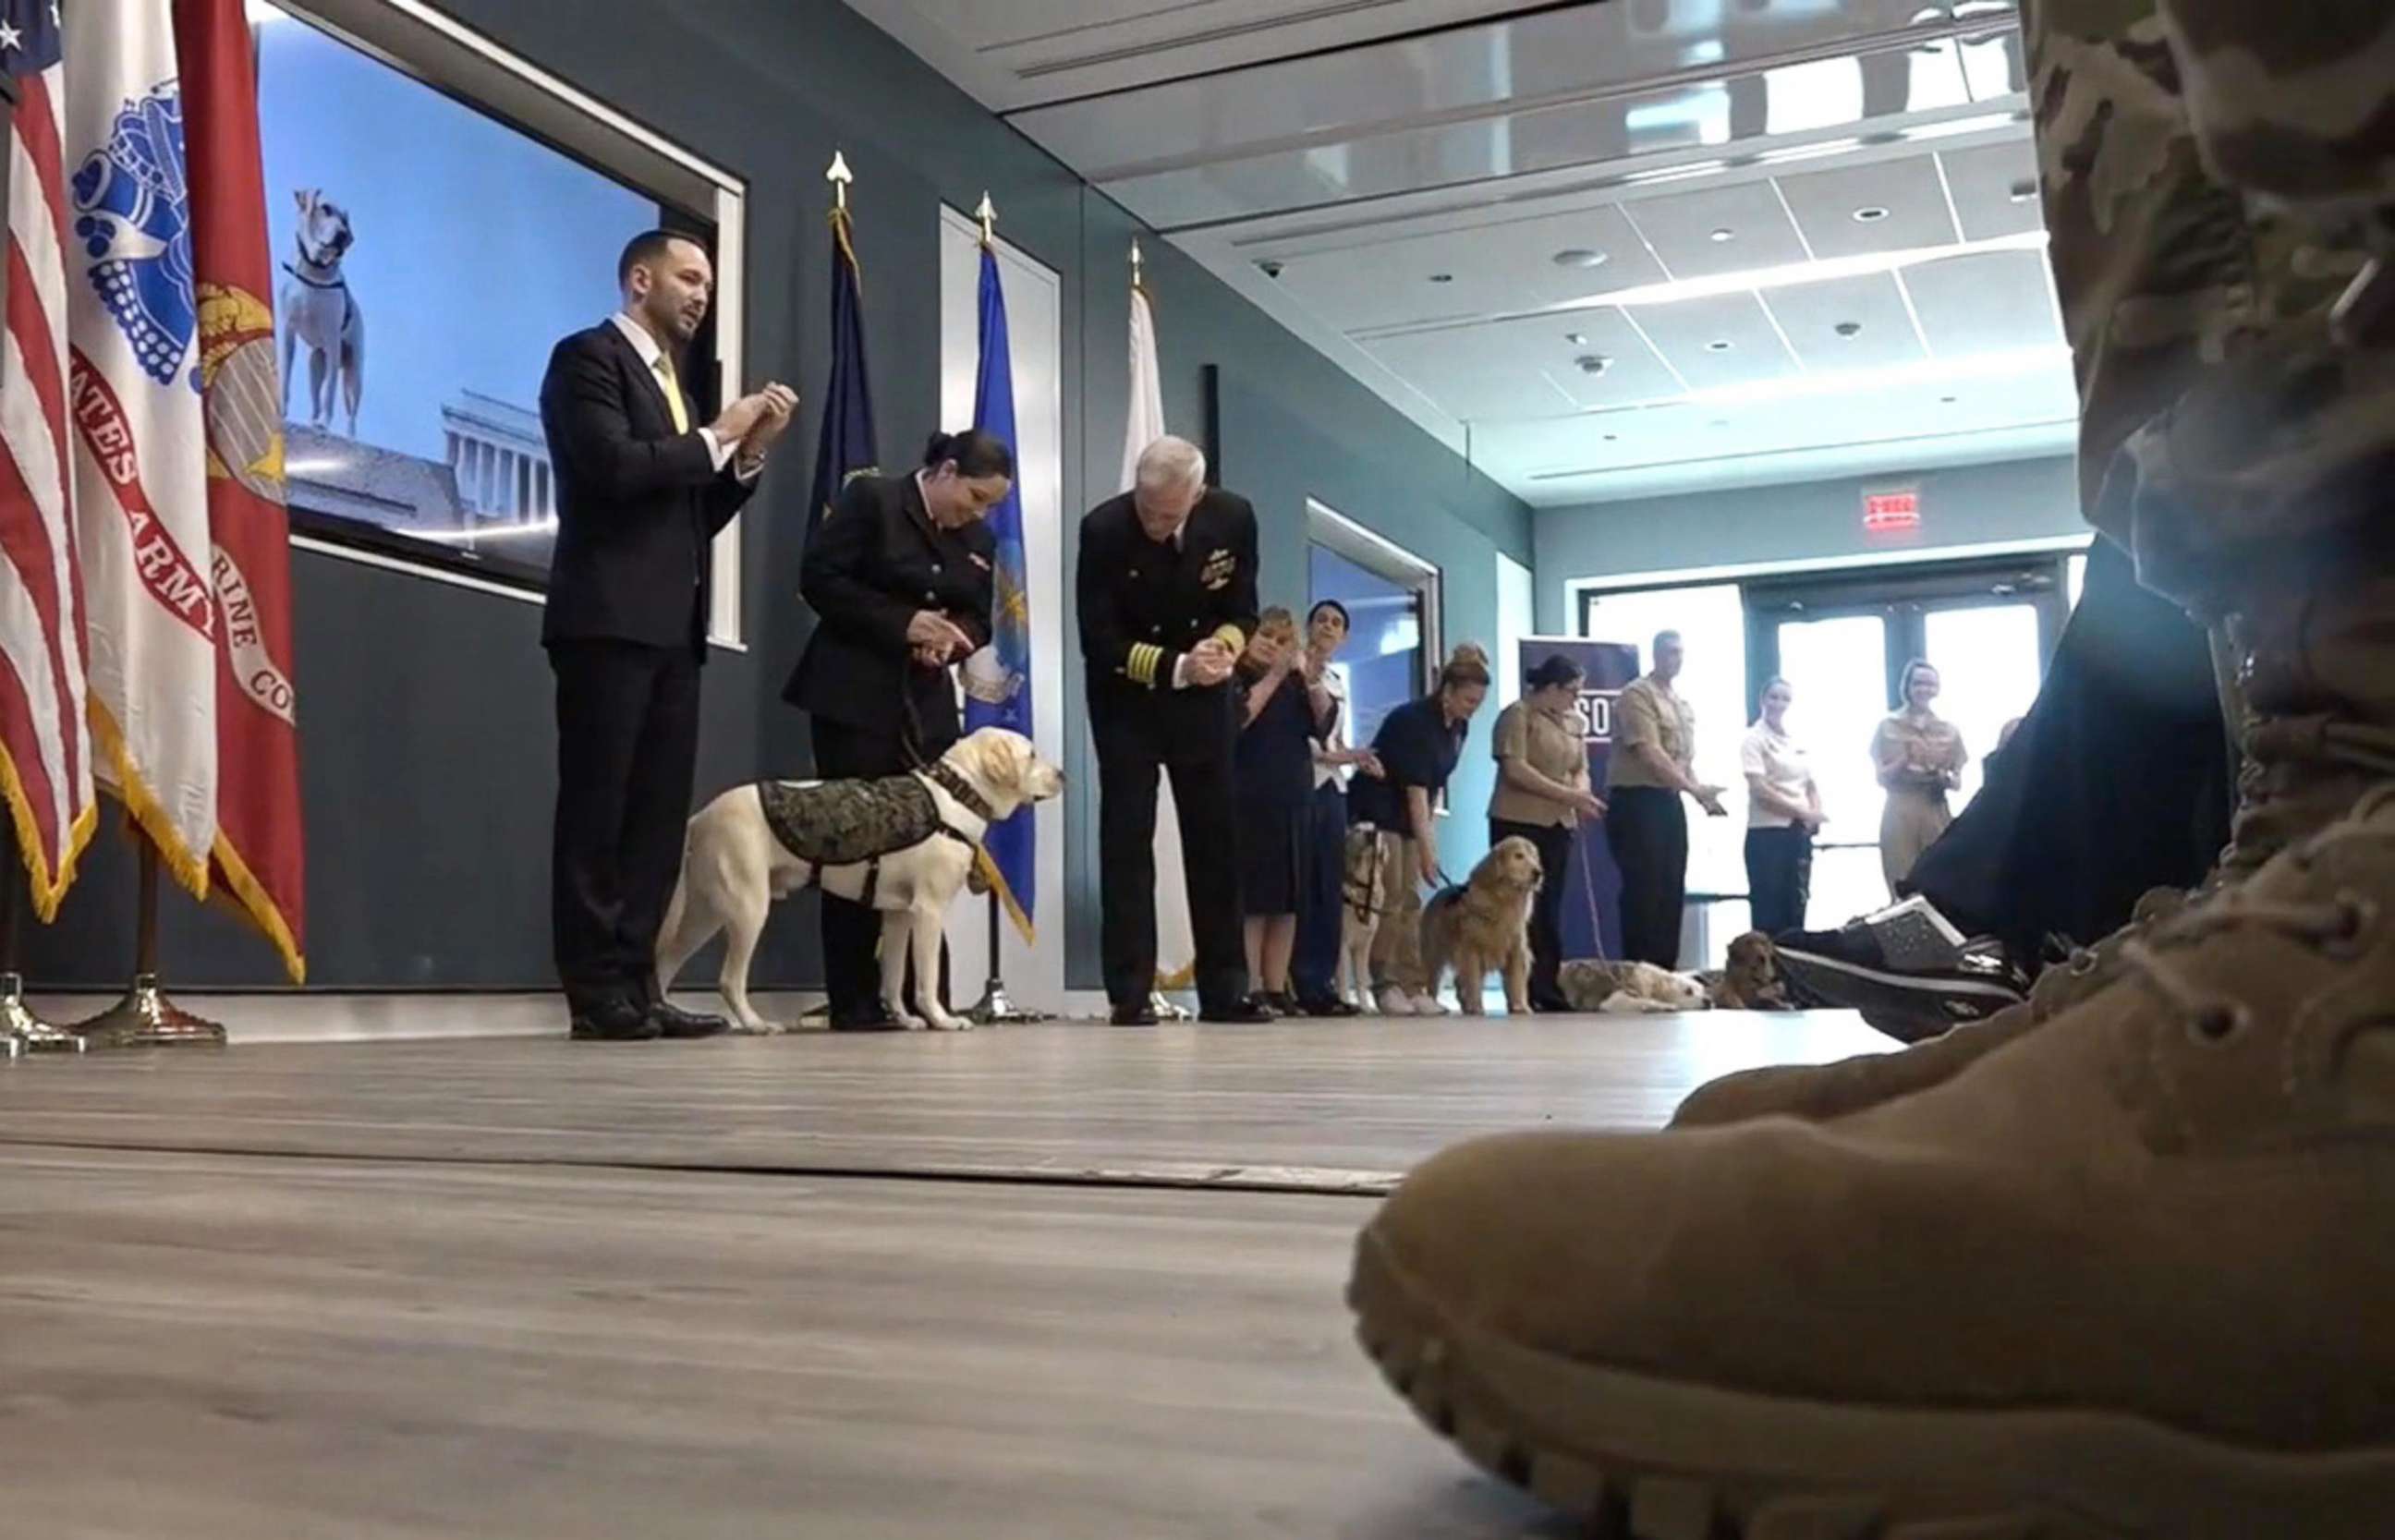 PHOTO: Former President George H. W. Bush's service dog, Sully, participates in an enlistment ceremony, joining the therapeutic dogs at Walter Reed National Military Medical Center in Bethesda, Md., Feb. 27, 2019.